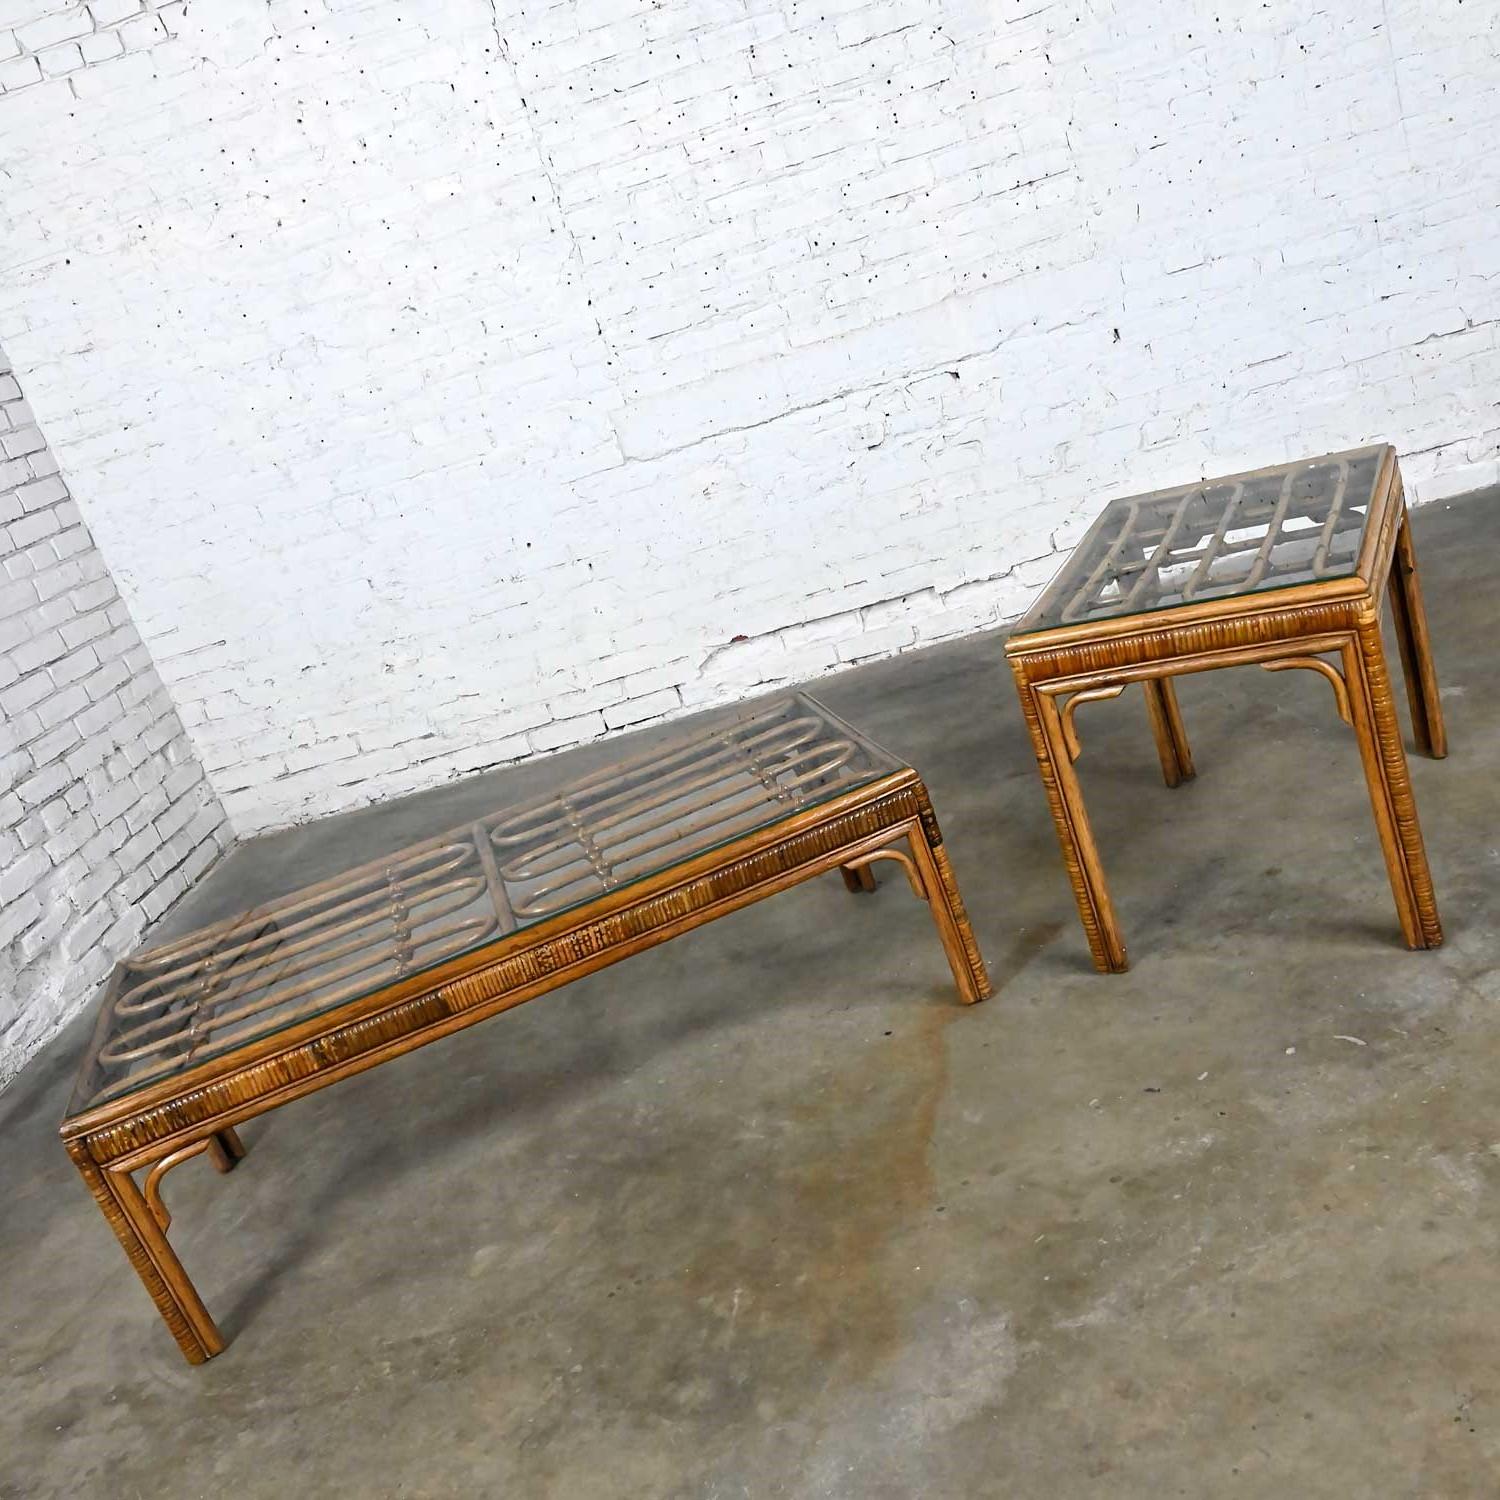 Fantastic vintage Organic Modern rattan coffee table and side table in the style of Ficks Reed. We are selling these as a pair. Beautiful condition, keeping in mind that these are vintage and not new so will have signs of use and wear. We have found